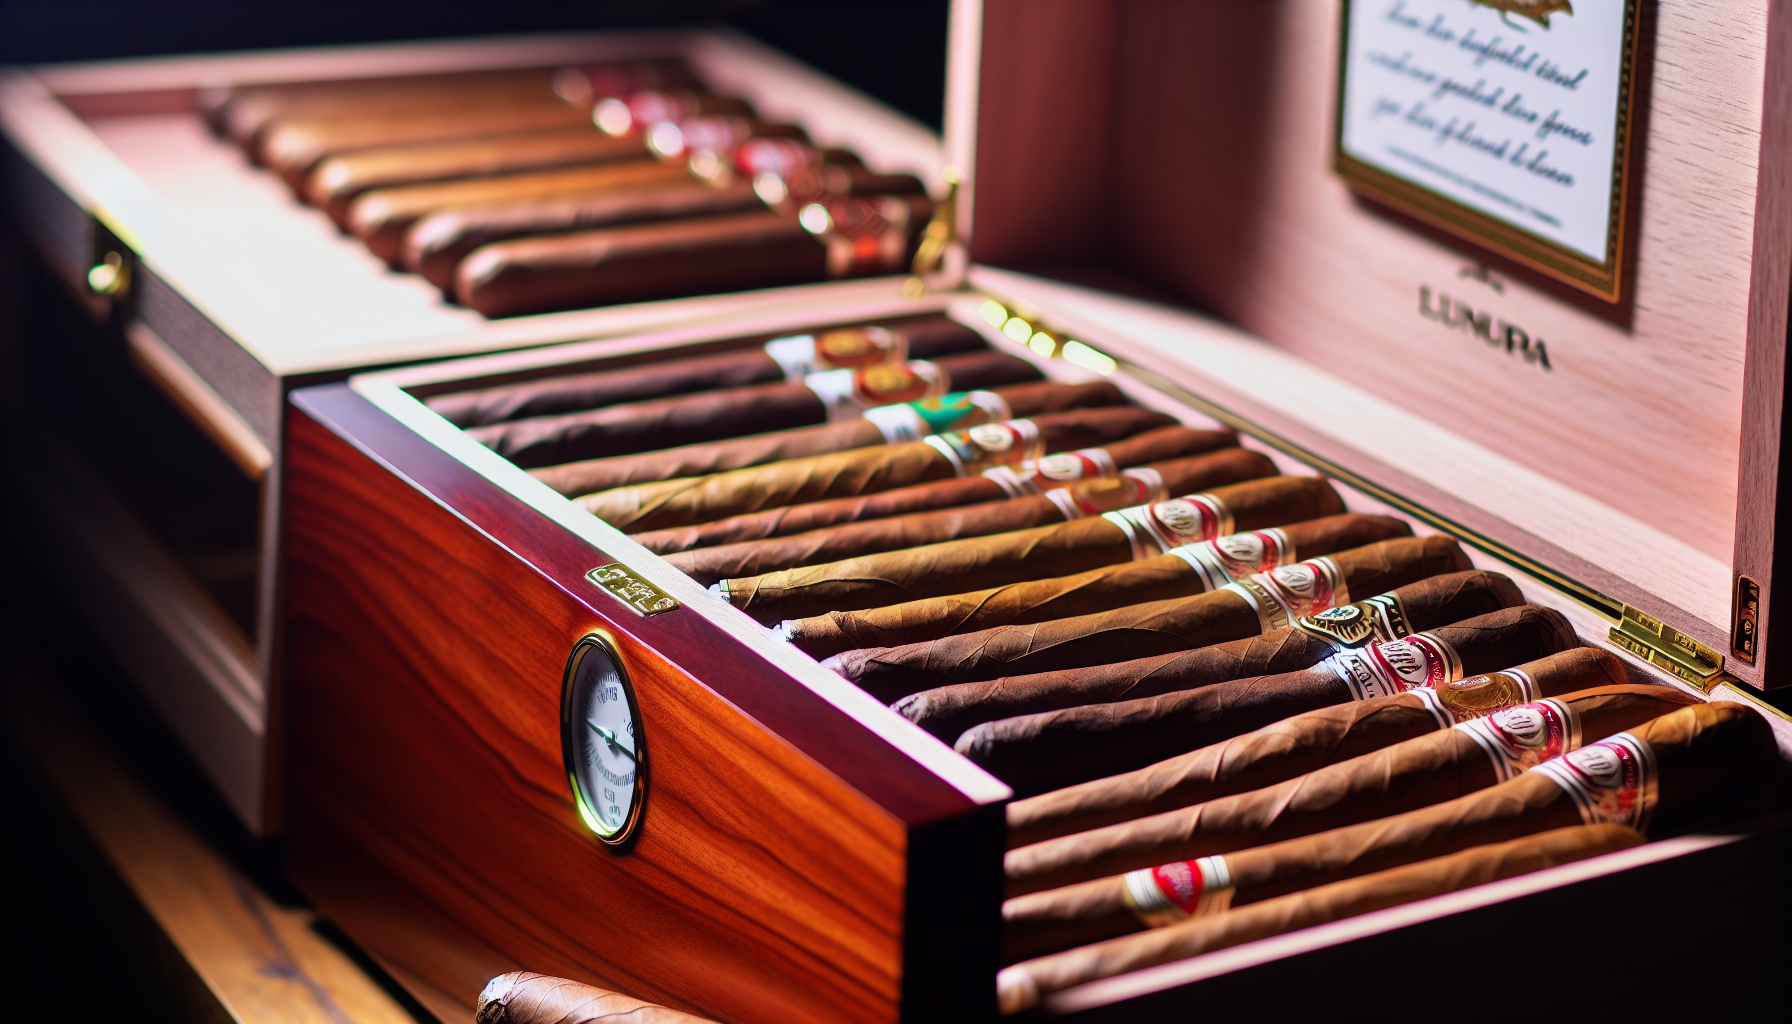 Exclusive handmade cigar collection in a humidor